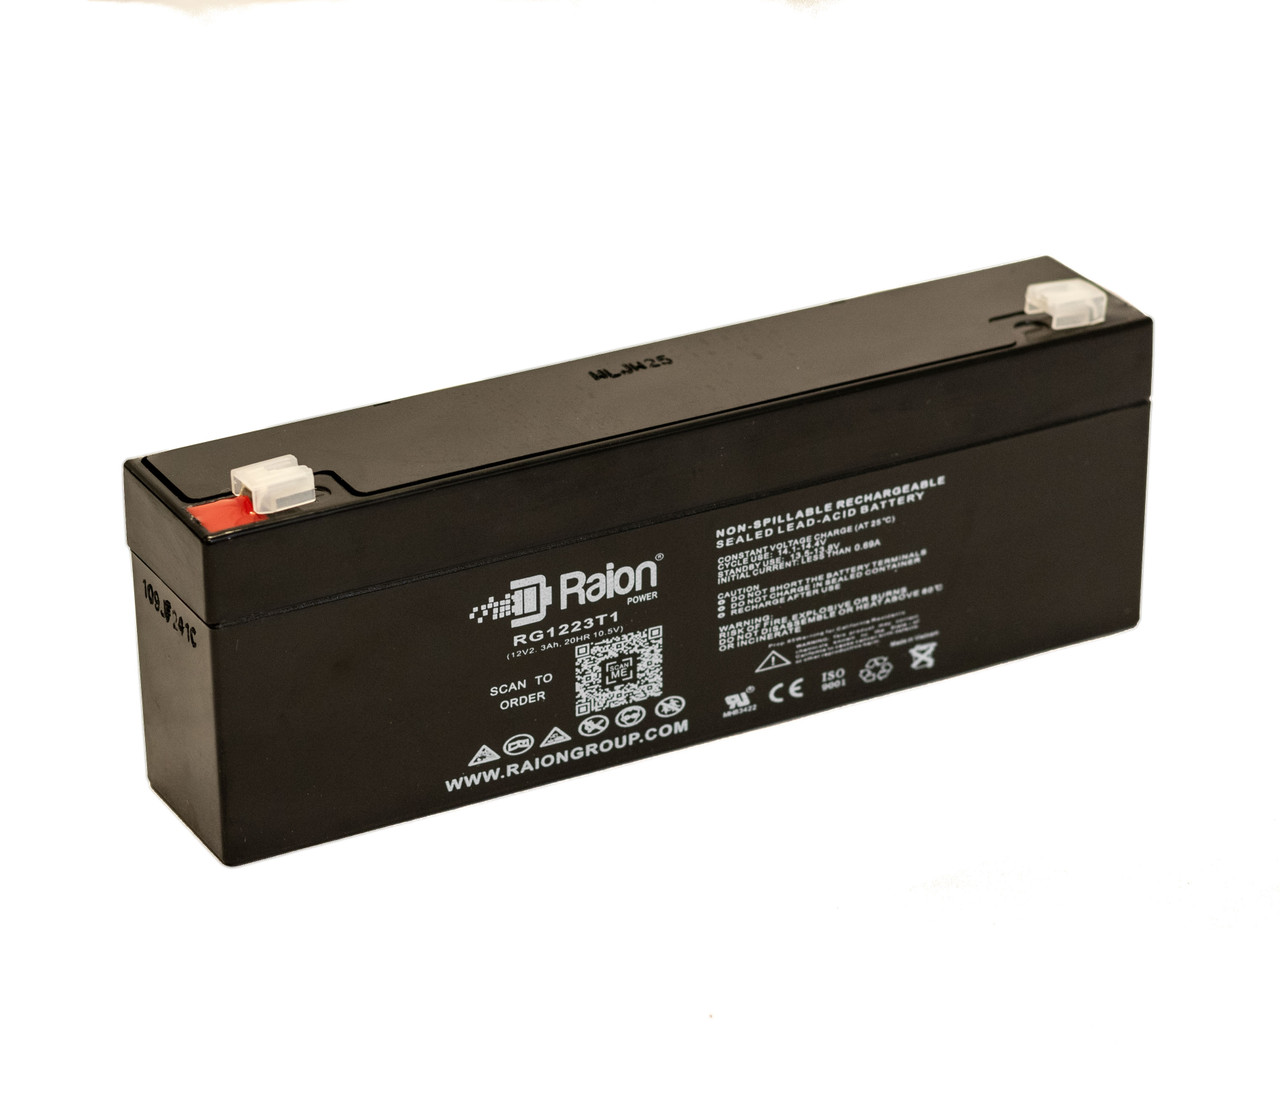 Raion Power RG1223T1 Replacement Battery for Medical Research Lab 200 Neuro Probe System